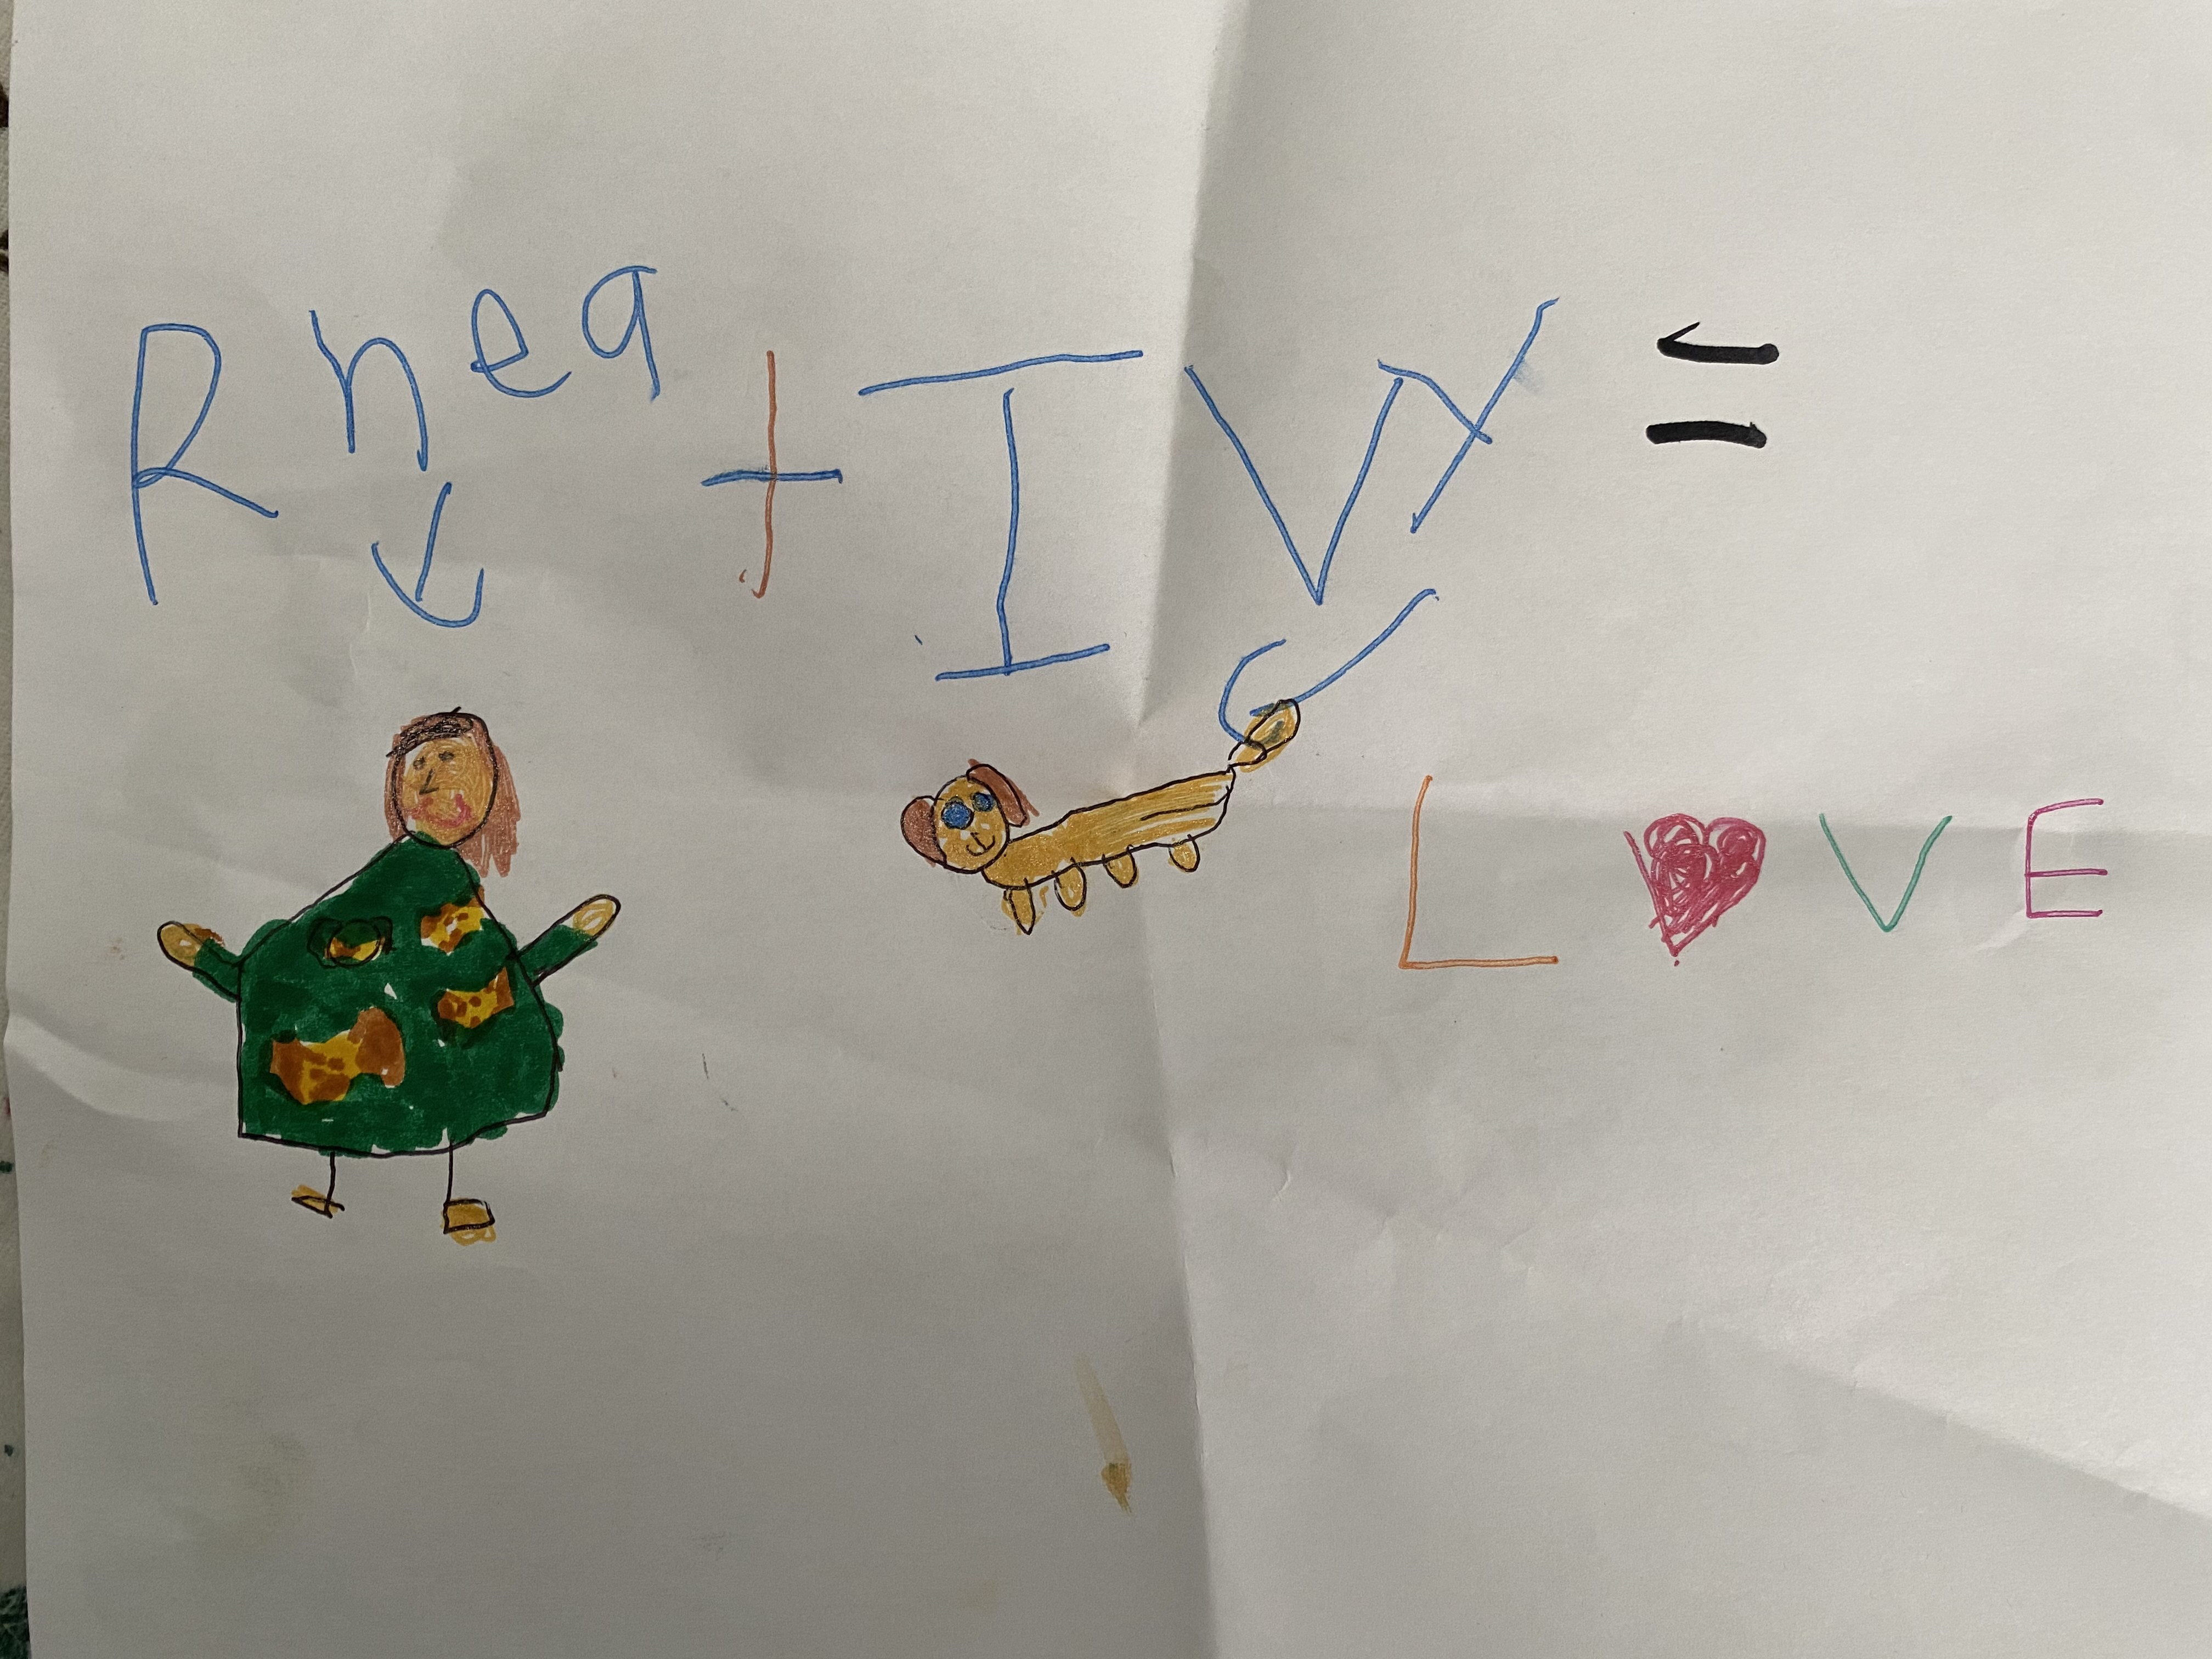 A drawing that Rhea did of herself and Ivy with the words “Rhea + Ivy = Love”.